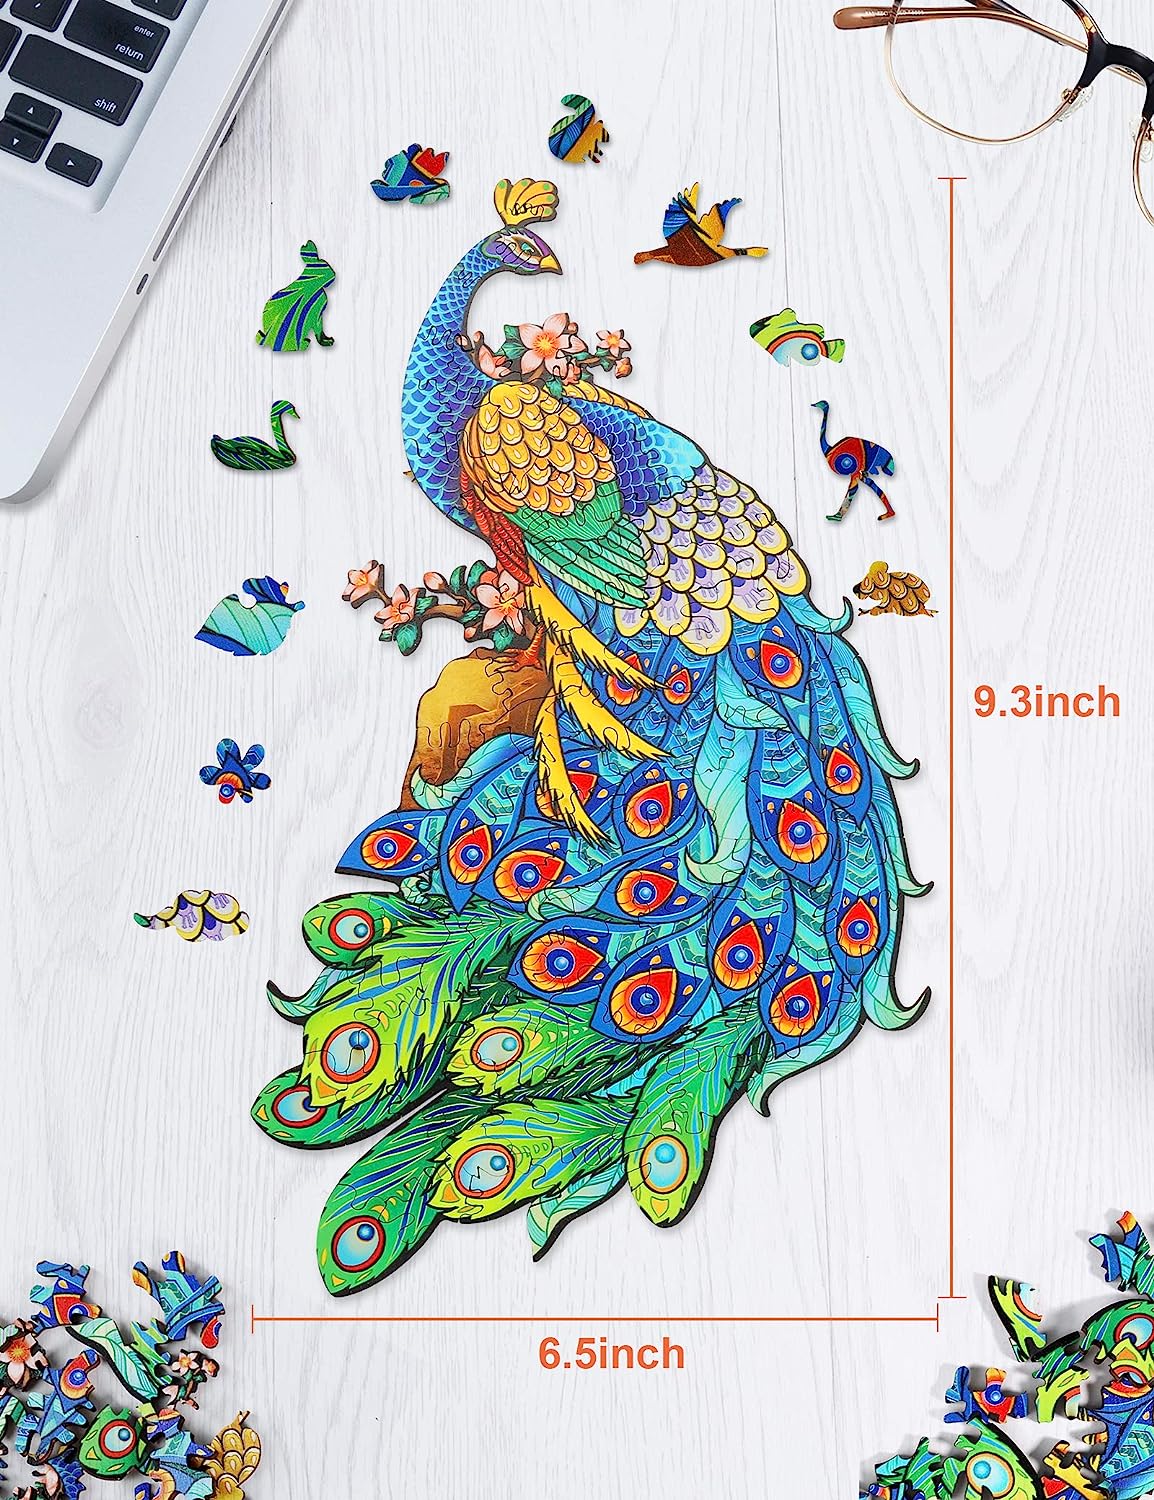 Wooden Jigsaw Puzzle, Wooden Puzzles for Adults, Animal Shaped Puzzles, Magic Puzzles, Unique Irregular Shaped Wood Puzzles, Mysterious Peacock, 9.3"(L) X 6.5"(W), 96 Pcs, Small